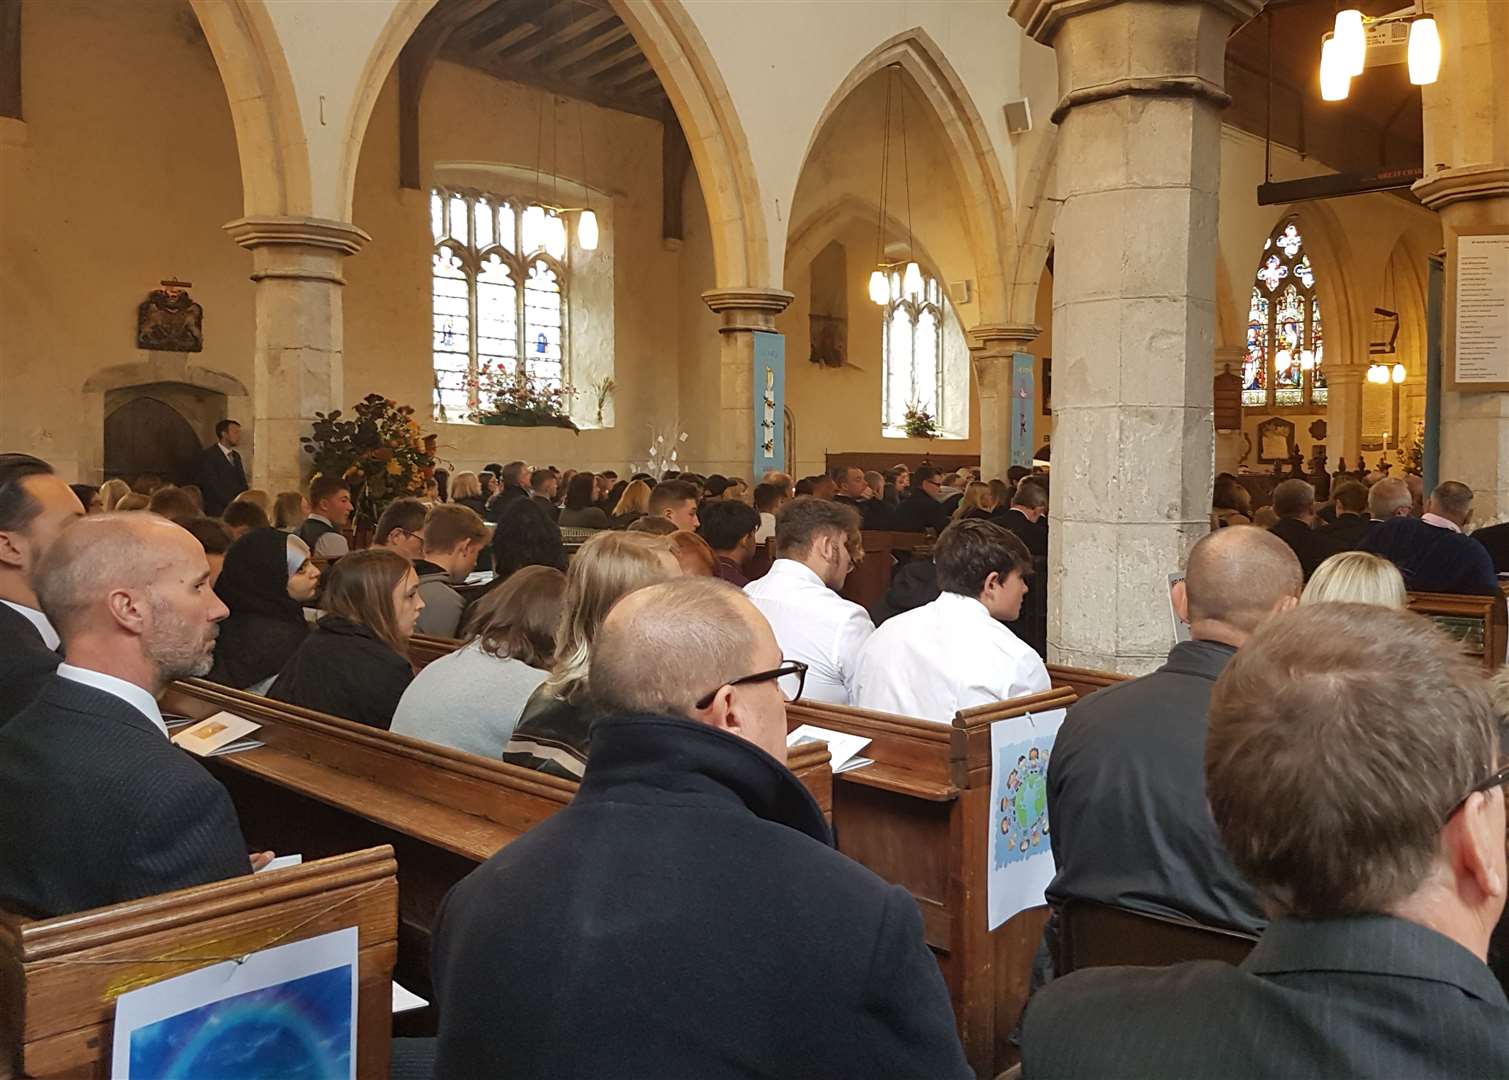 A host of friends and family filled St Mary's Church in Great Chart, where people had to stand due to the crowd